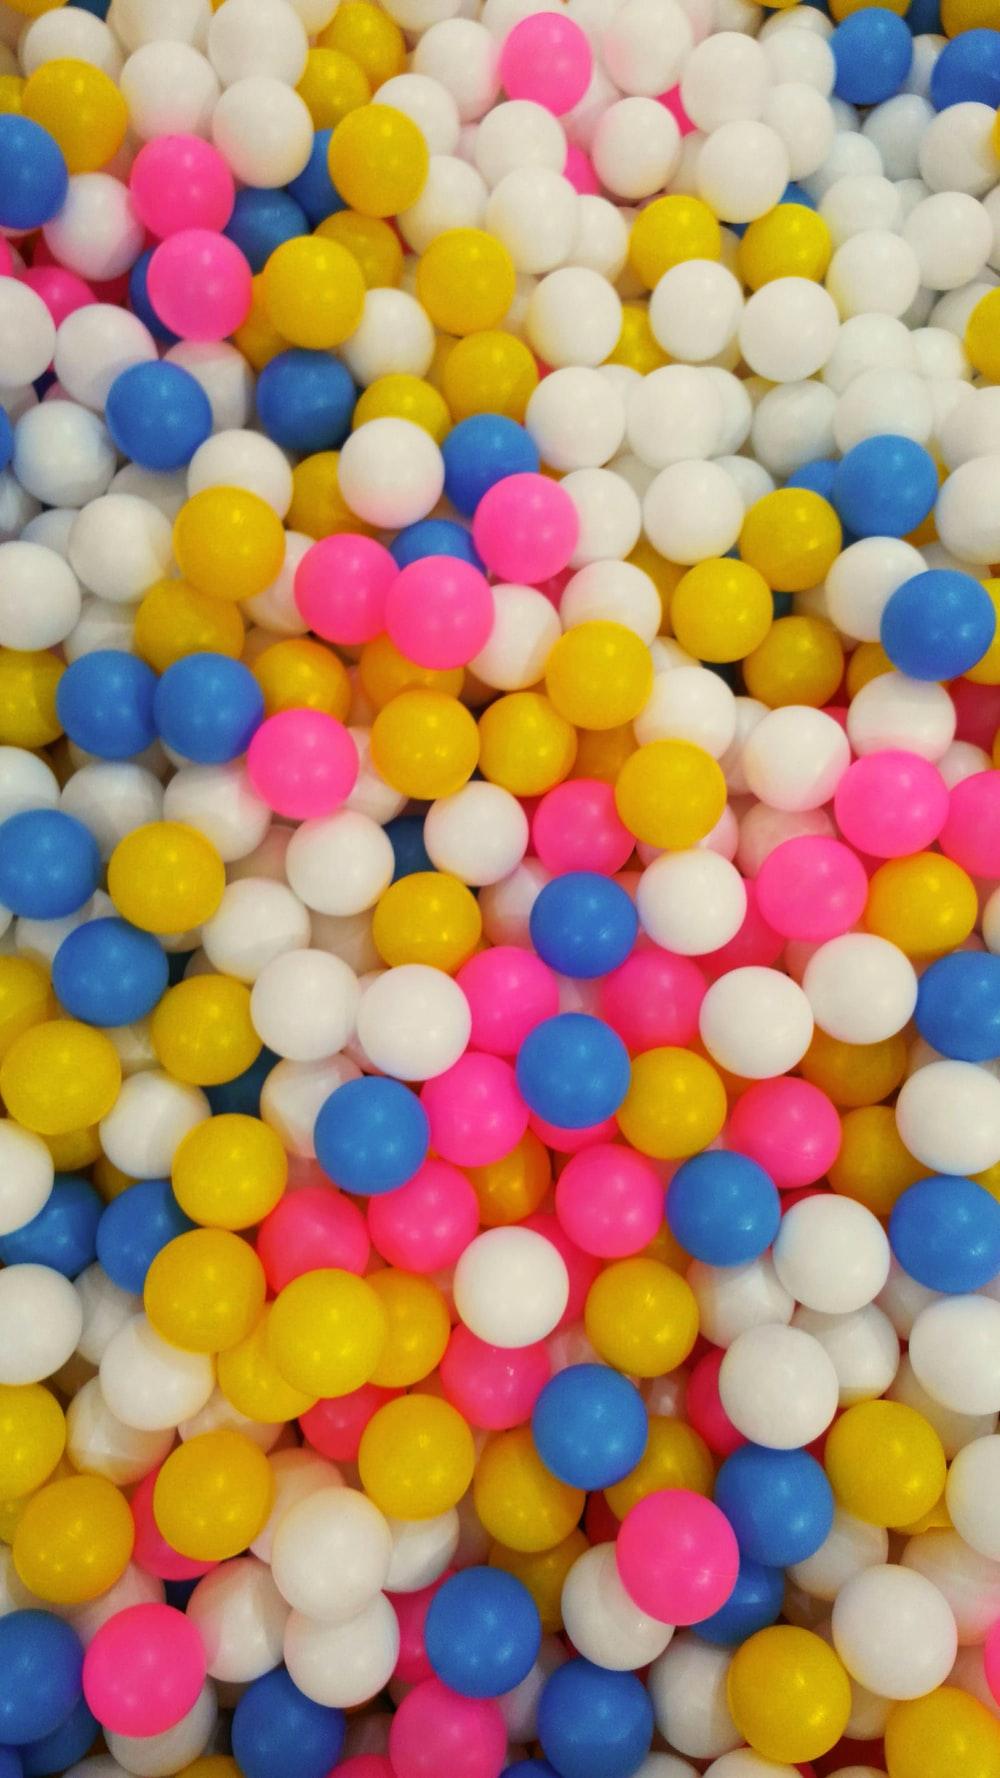 Ball Pit Picture [HD]. Download Free Image